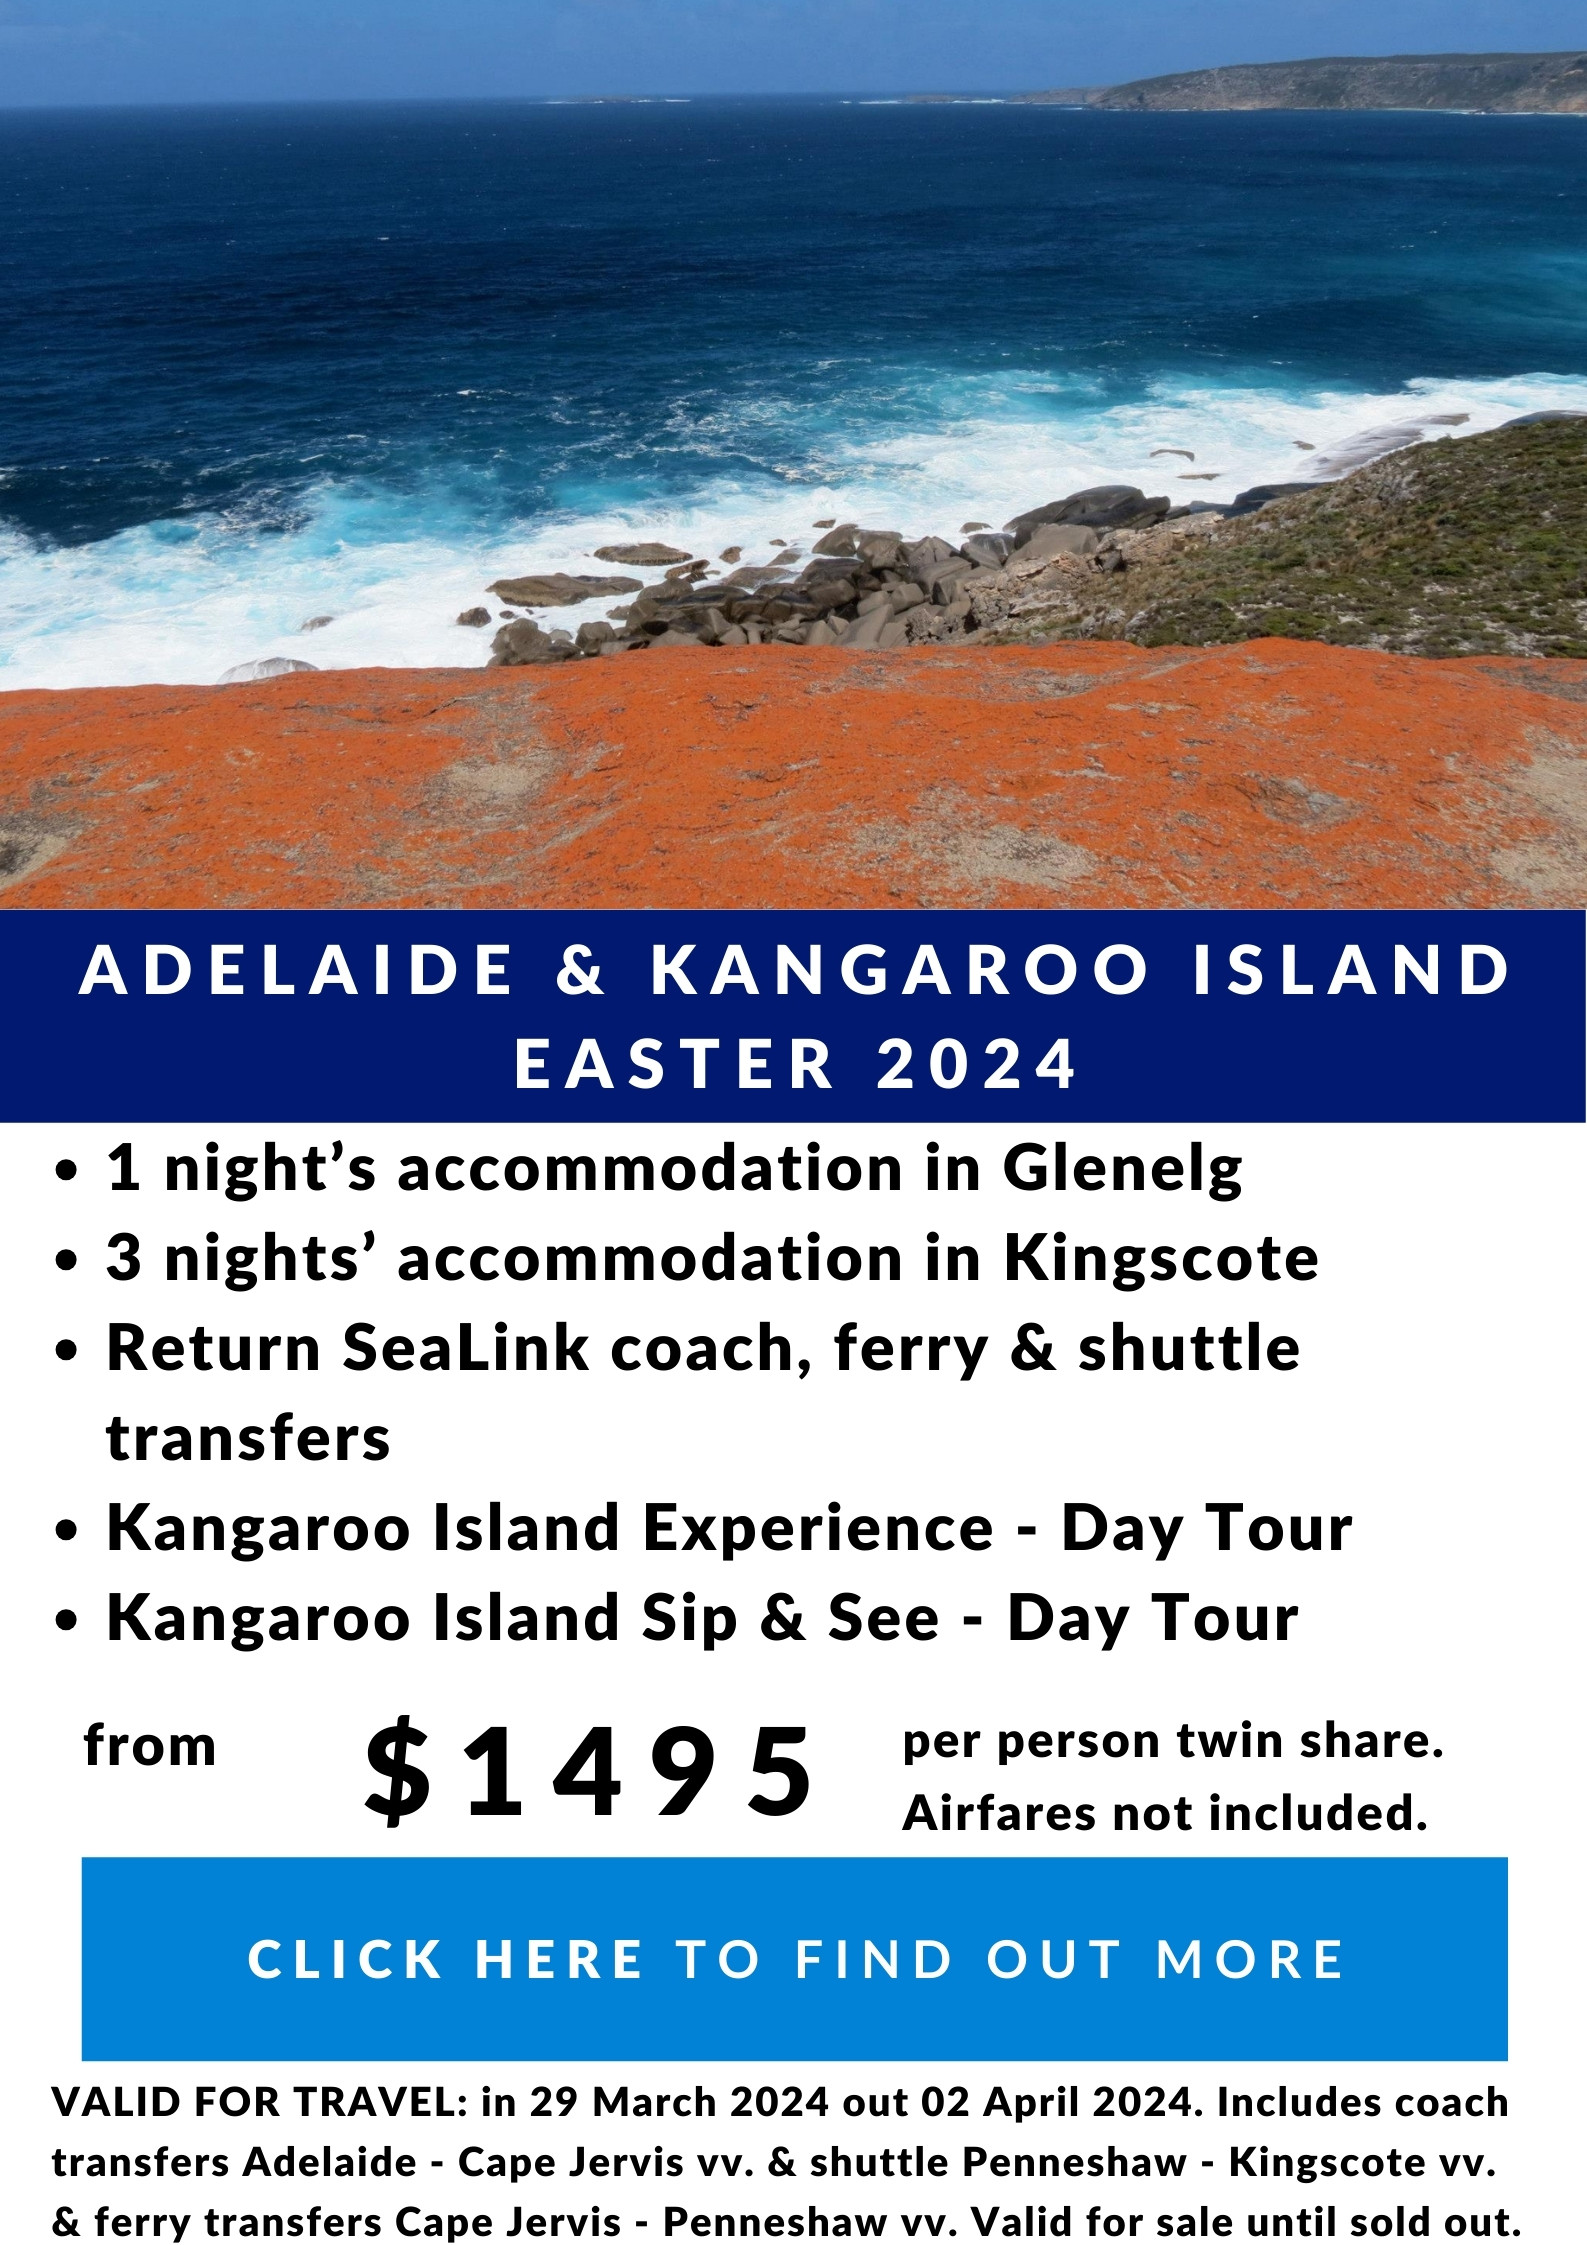 From $1495 per person twin share